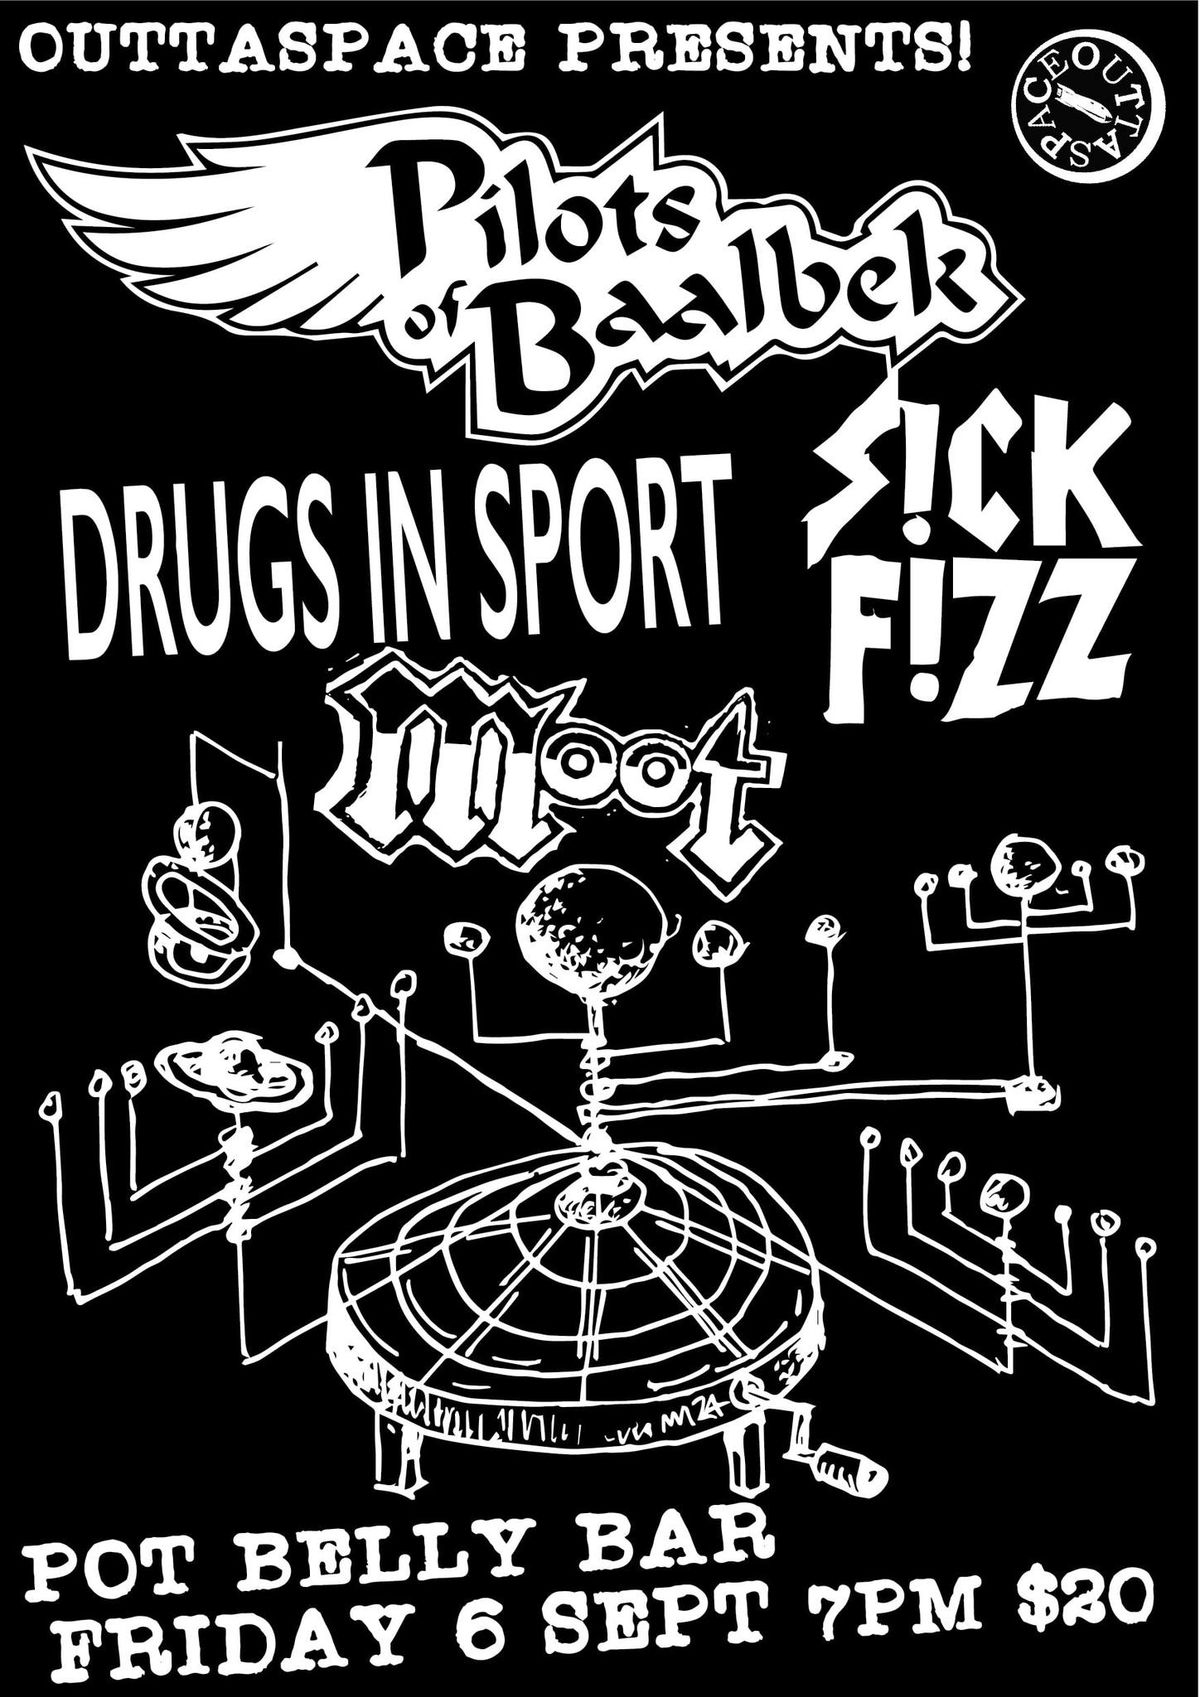 OUTTASPACE WEEKENDER Canberra edition with PILOTS OF BAALBEK, SICK FIZZ, DRUGS IN SPORT,MOOT